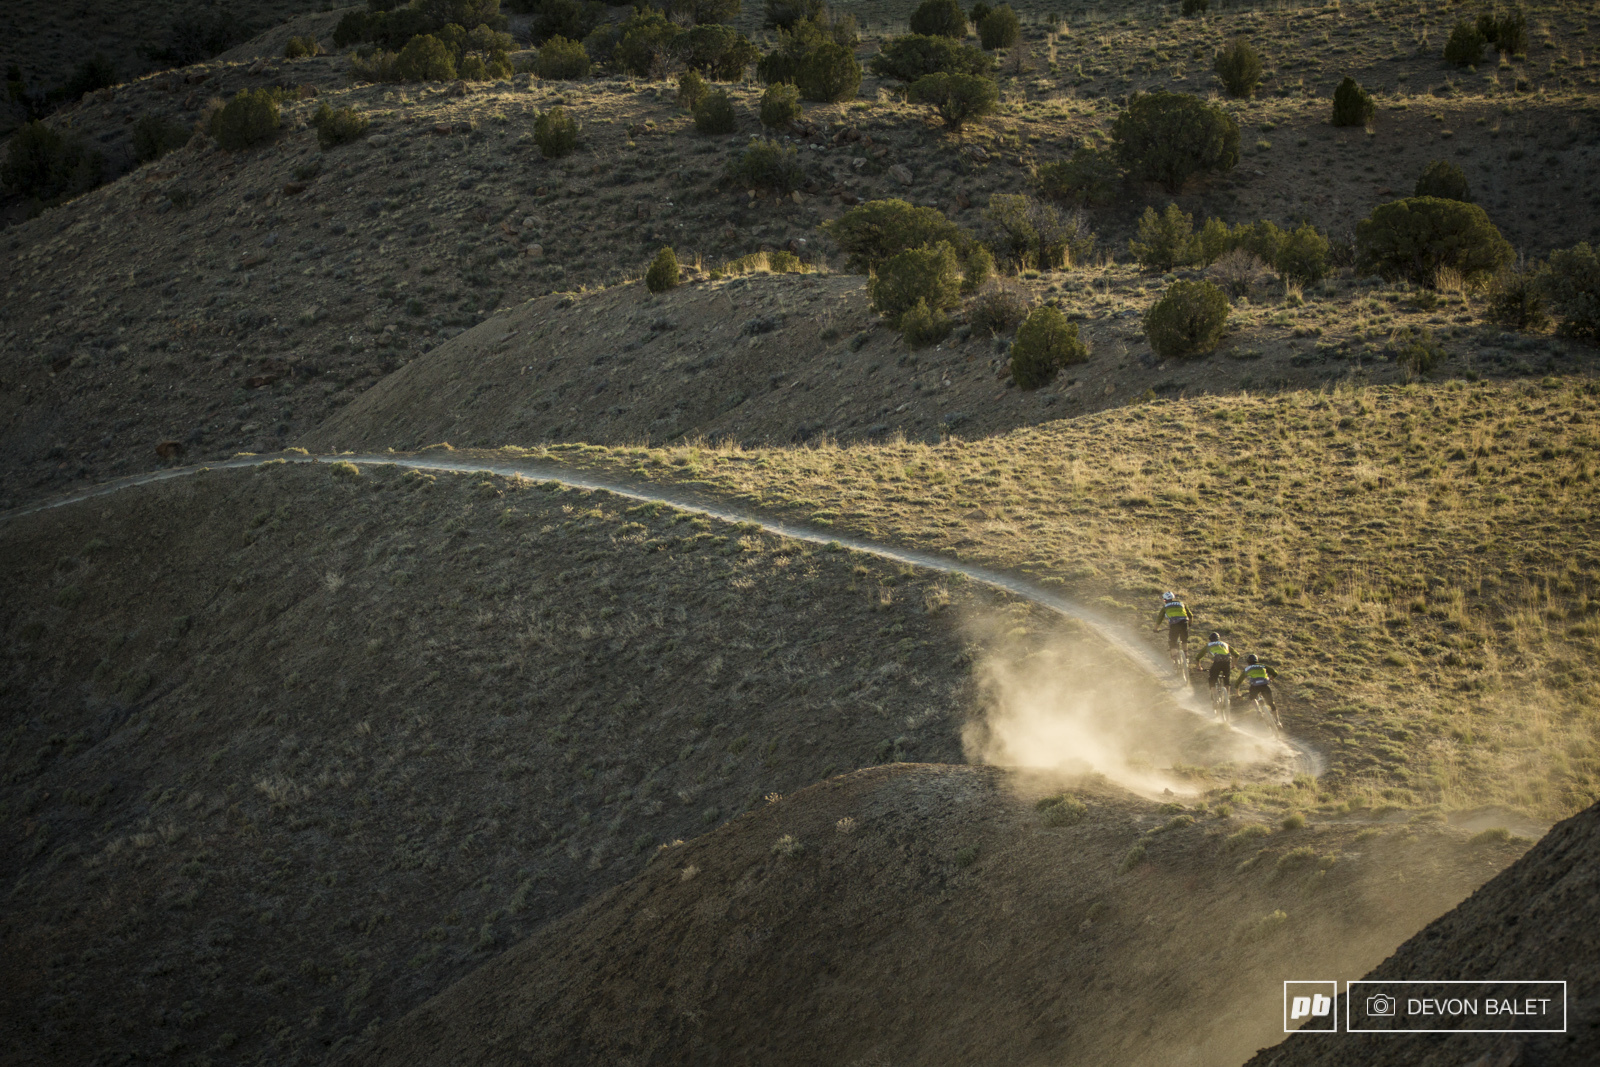 Photos from episode 2 of the #TrailLove series presented by BMC, Pinkbike, Trail Forks and Pearl Izumi.